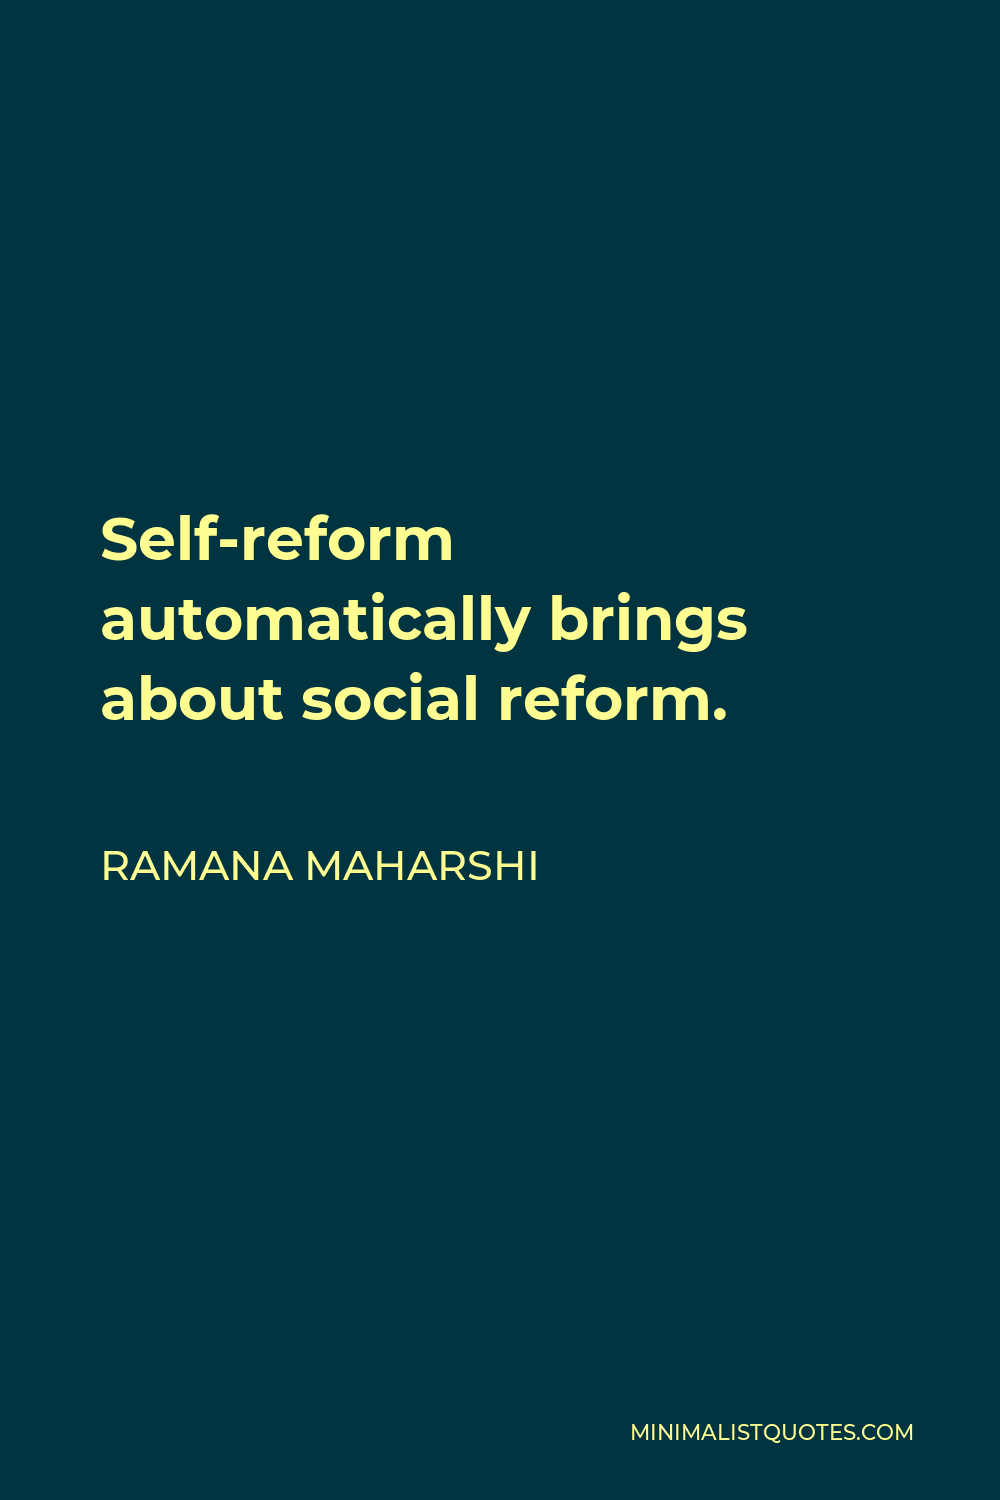 Ramana Maharshi Quote - Self-reform automatically brings about social reform.